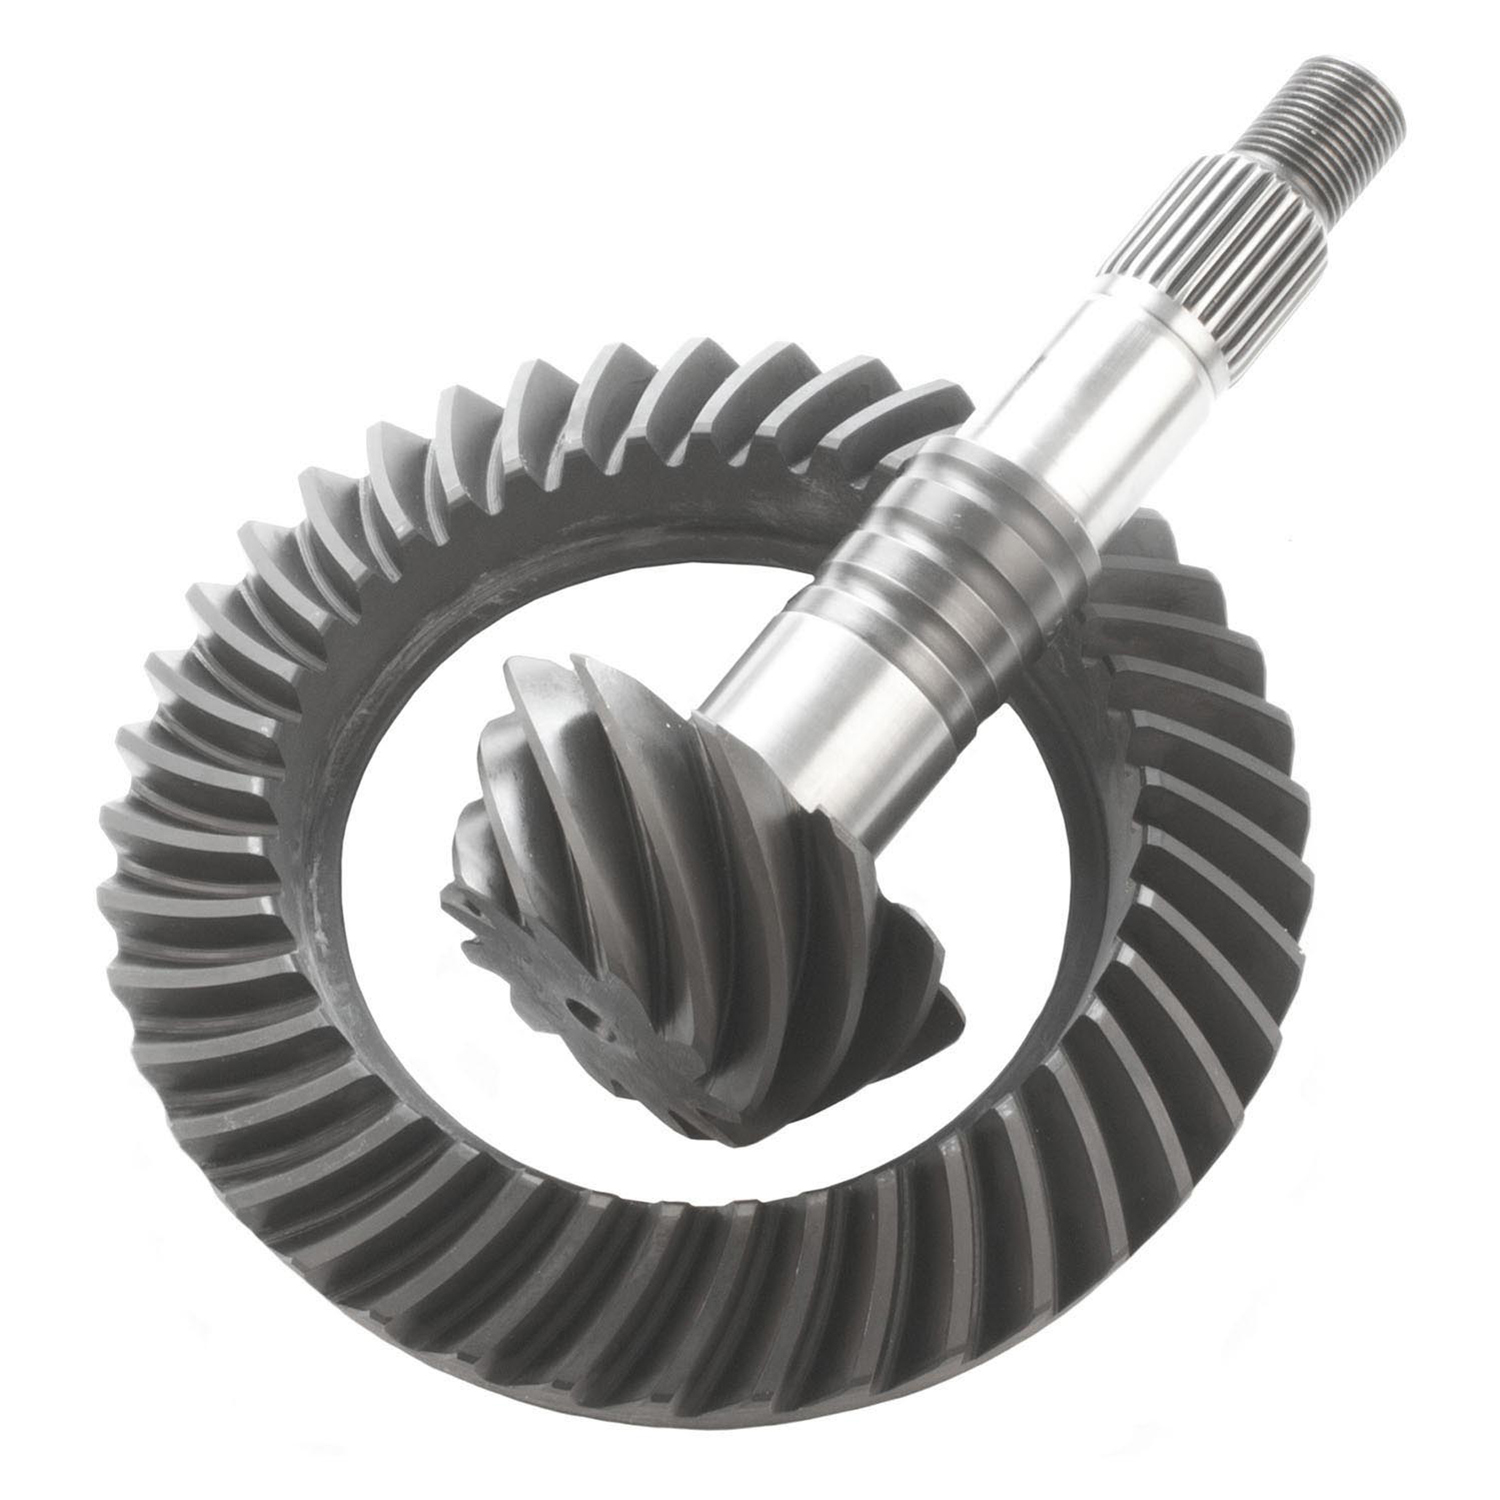 Richmond Gear GM75373OE - Ring and Pinion, Excel, 3.73 Ratio, 27 Spline Pinion, 3 Series, 7.5 in / 7.625 in / 7.6 in IFS, GM 10-Bolt, Kit